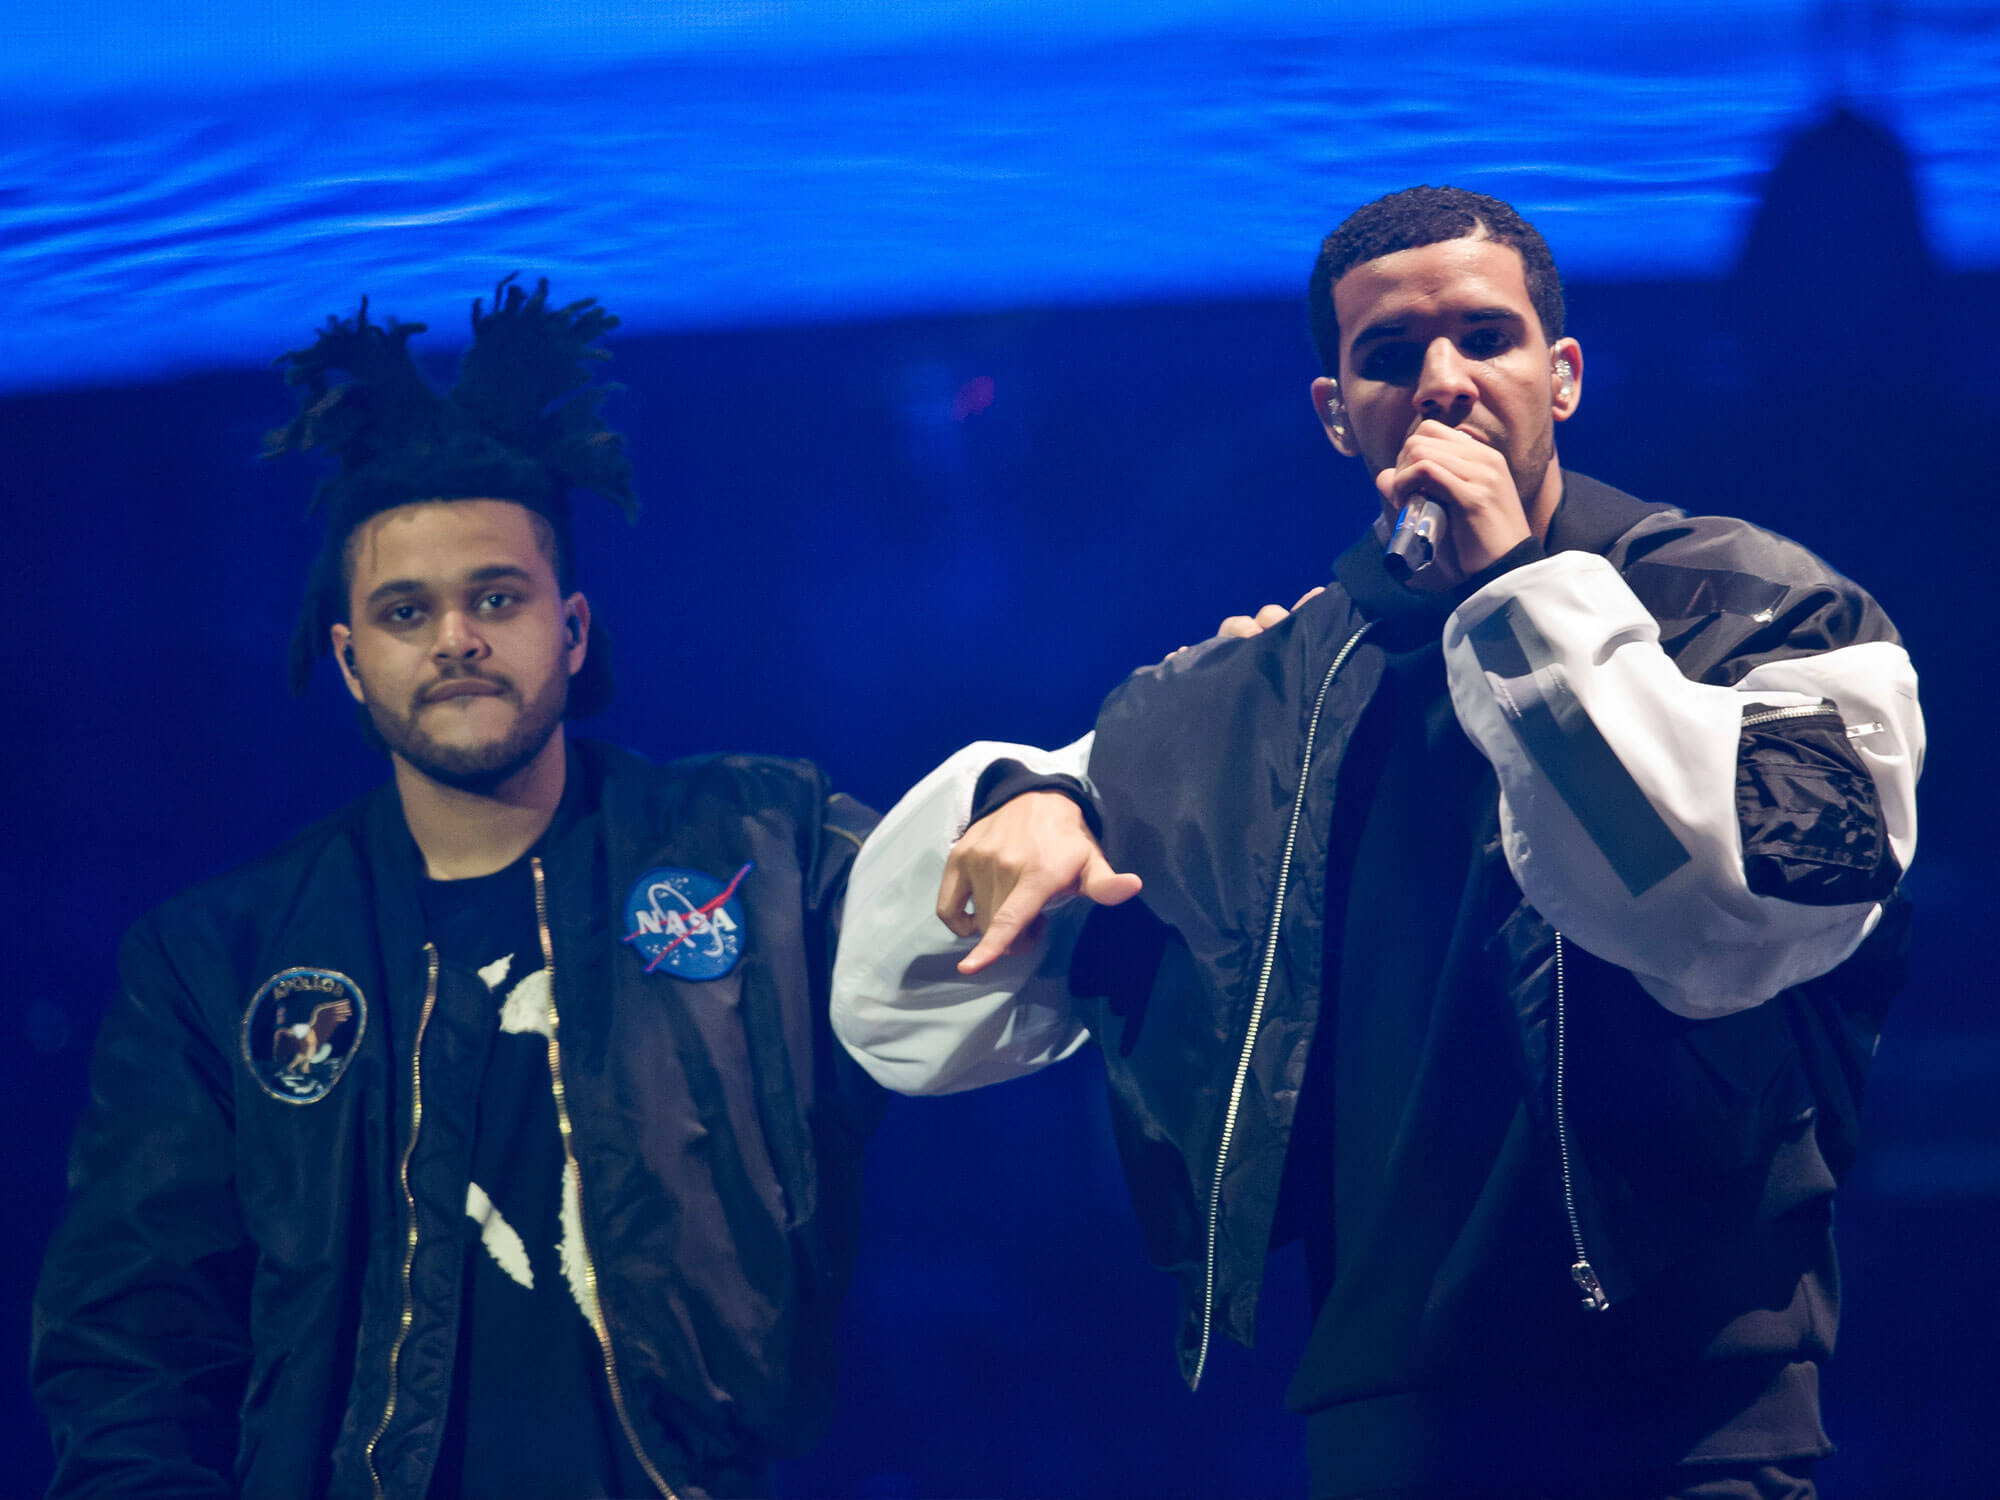 [L-R] The Weeknd and Drake